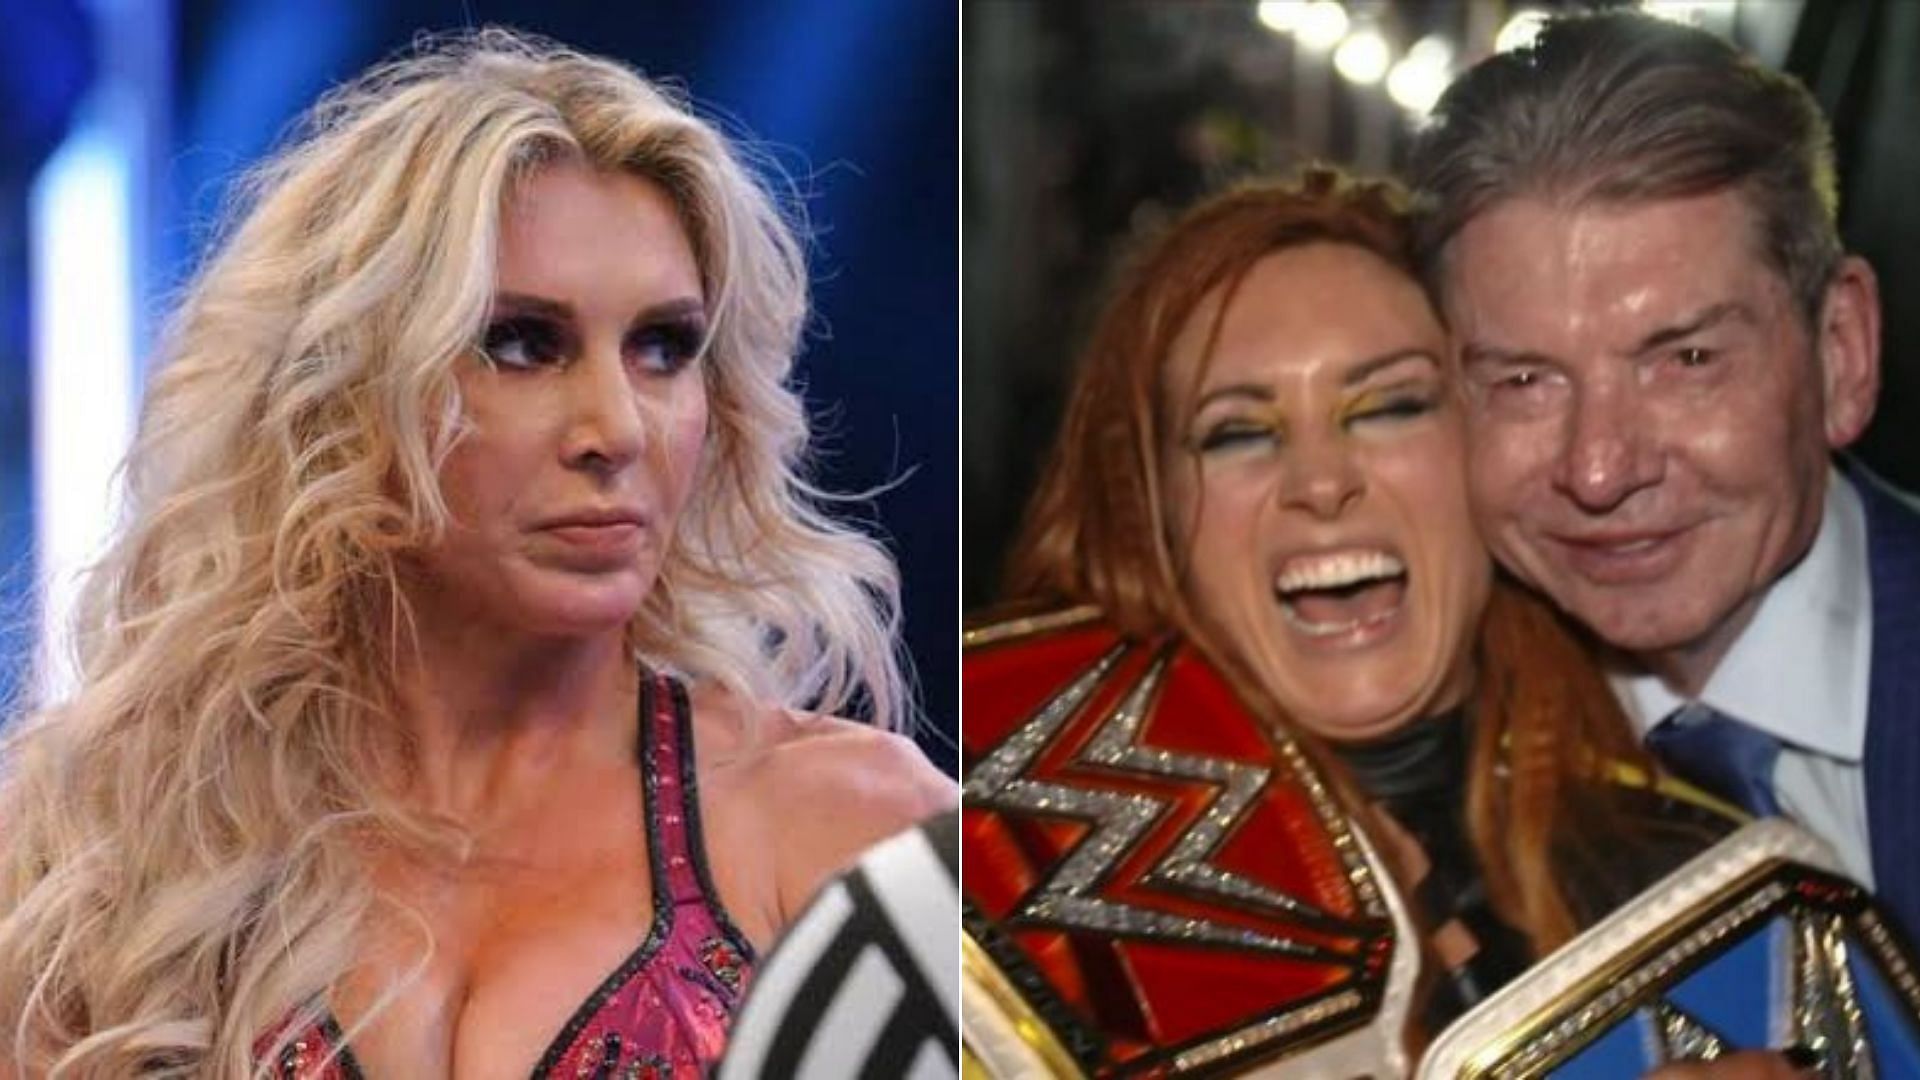 Charlotte Flair and Becky Lynch were part of the Four Horsewomen